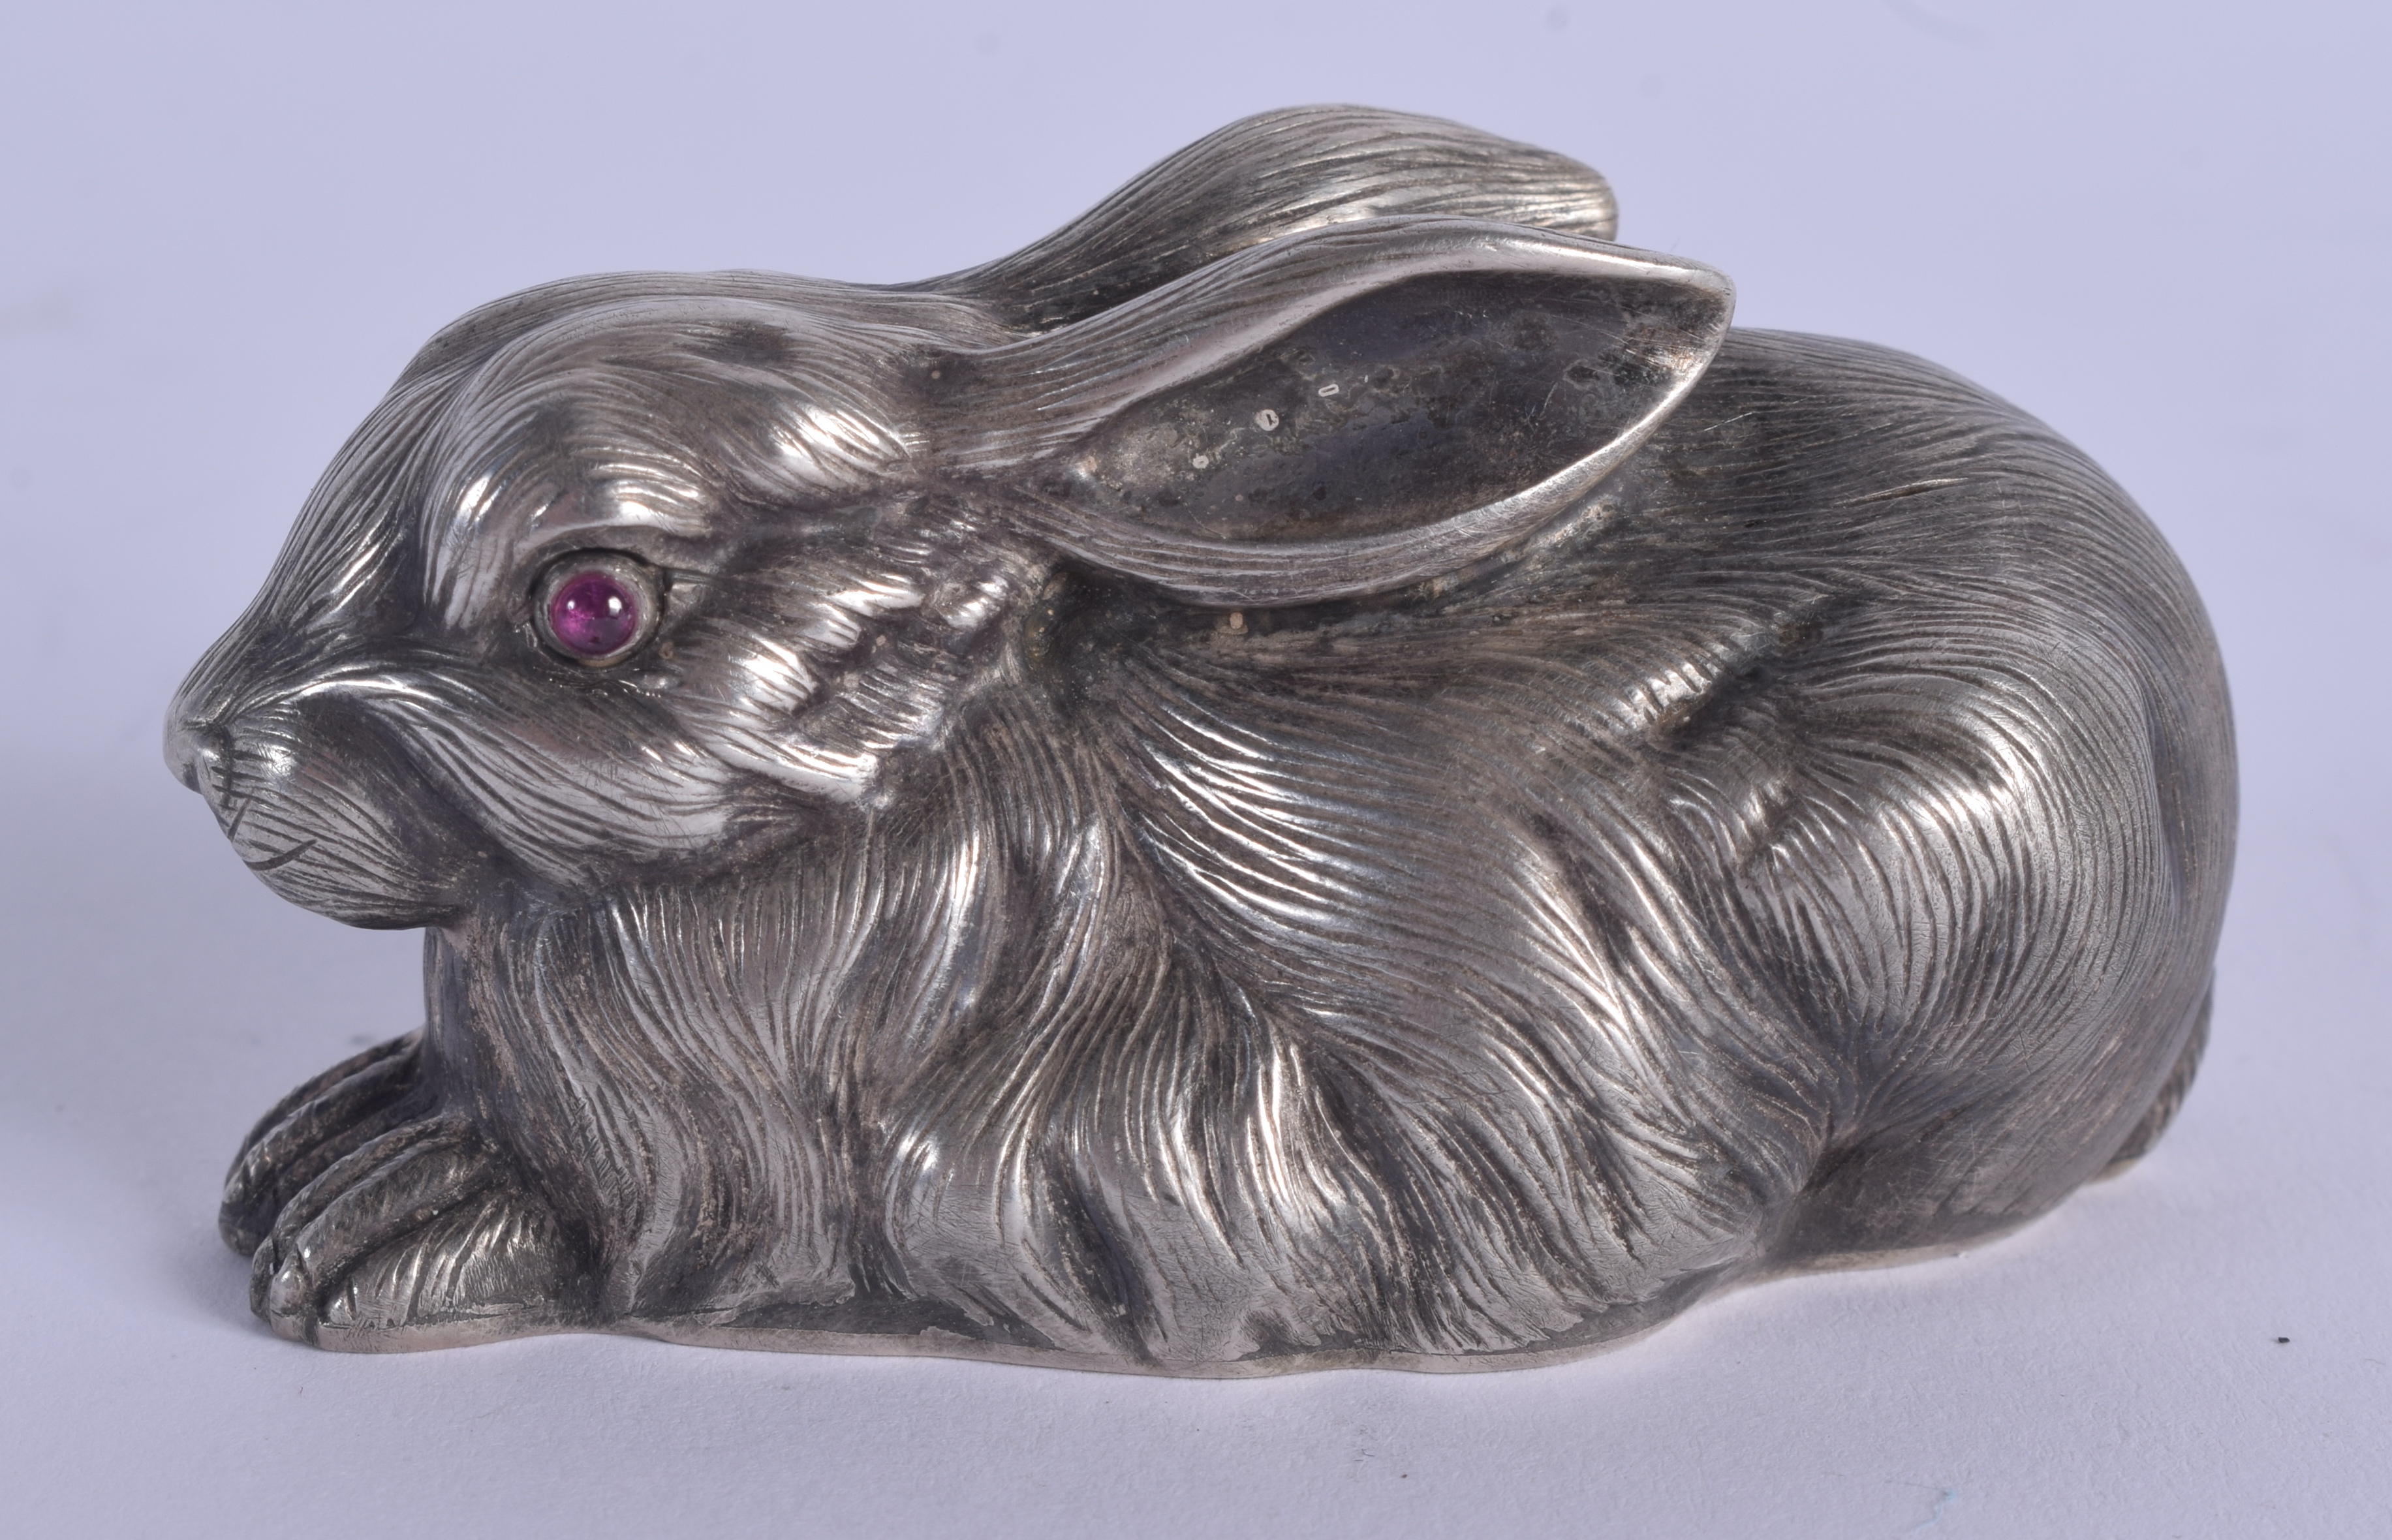 A CONTINENTAL SILVER AND RUBY EYED FIGURE OF A RABBIT. 53 grams. 5.5 cm x 3 cm.